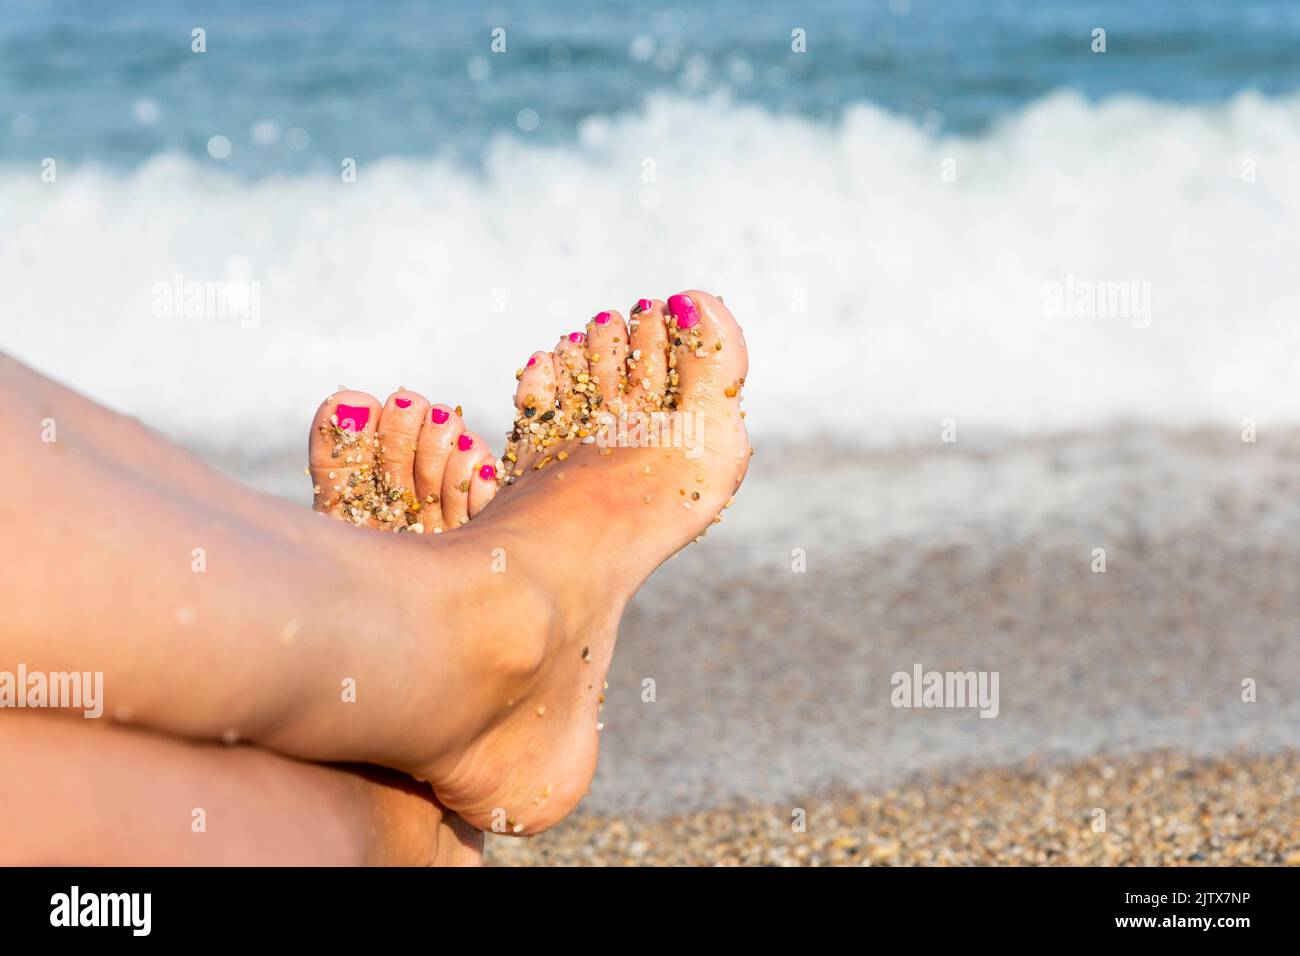 Woman feet closeup on a beach. Pink nails on toes. Enjoying sun on sunny summer day by the water. Stock Photo